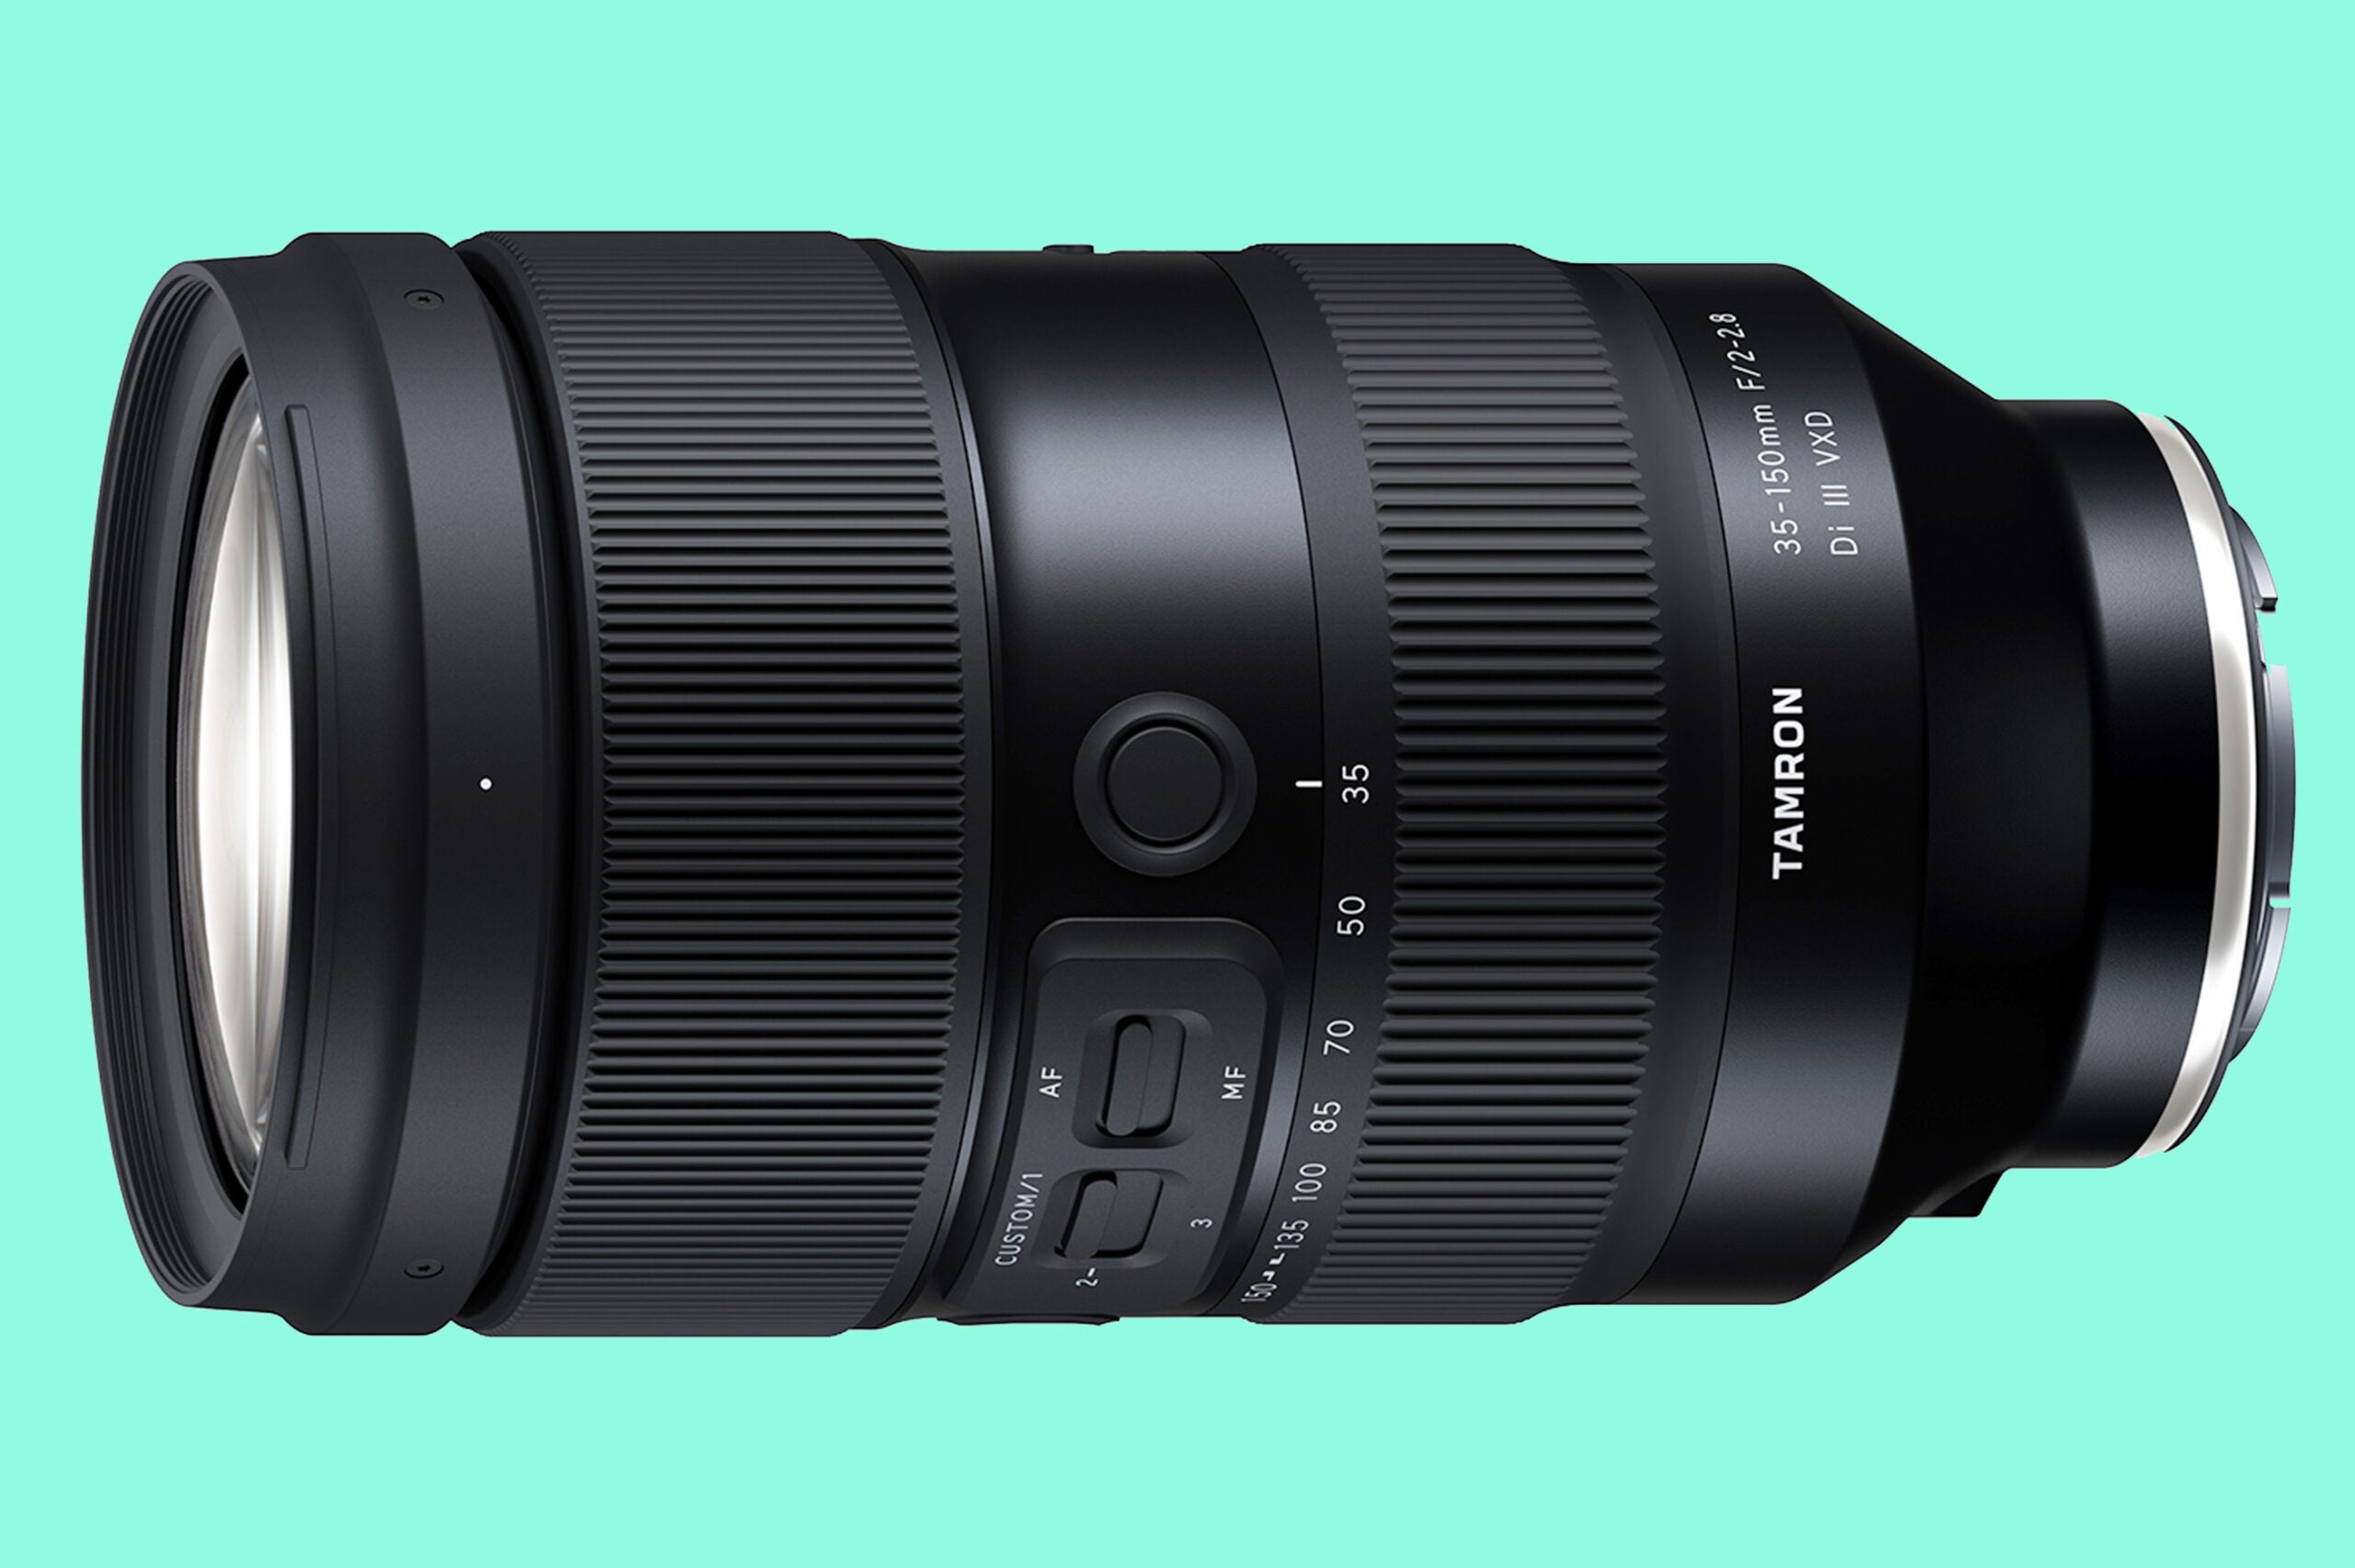 New gear: Tamron 35-150mm f/2-2.8 travel zoom | Popular Photography